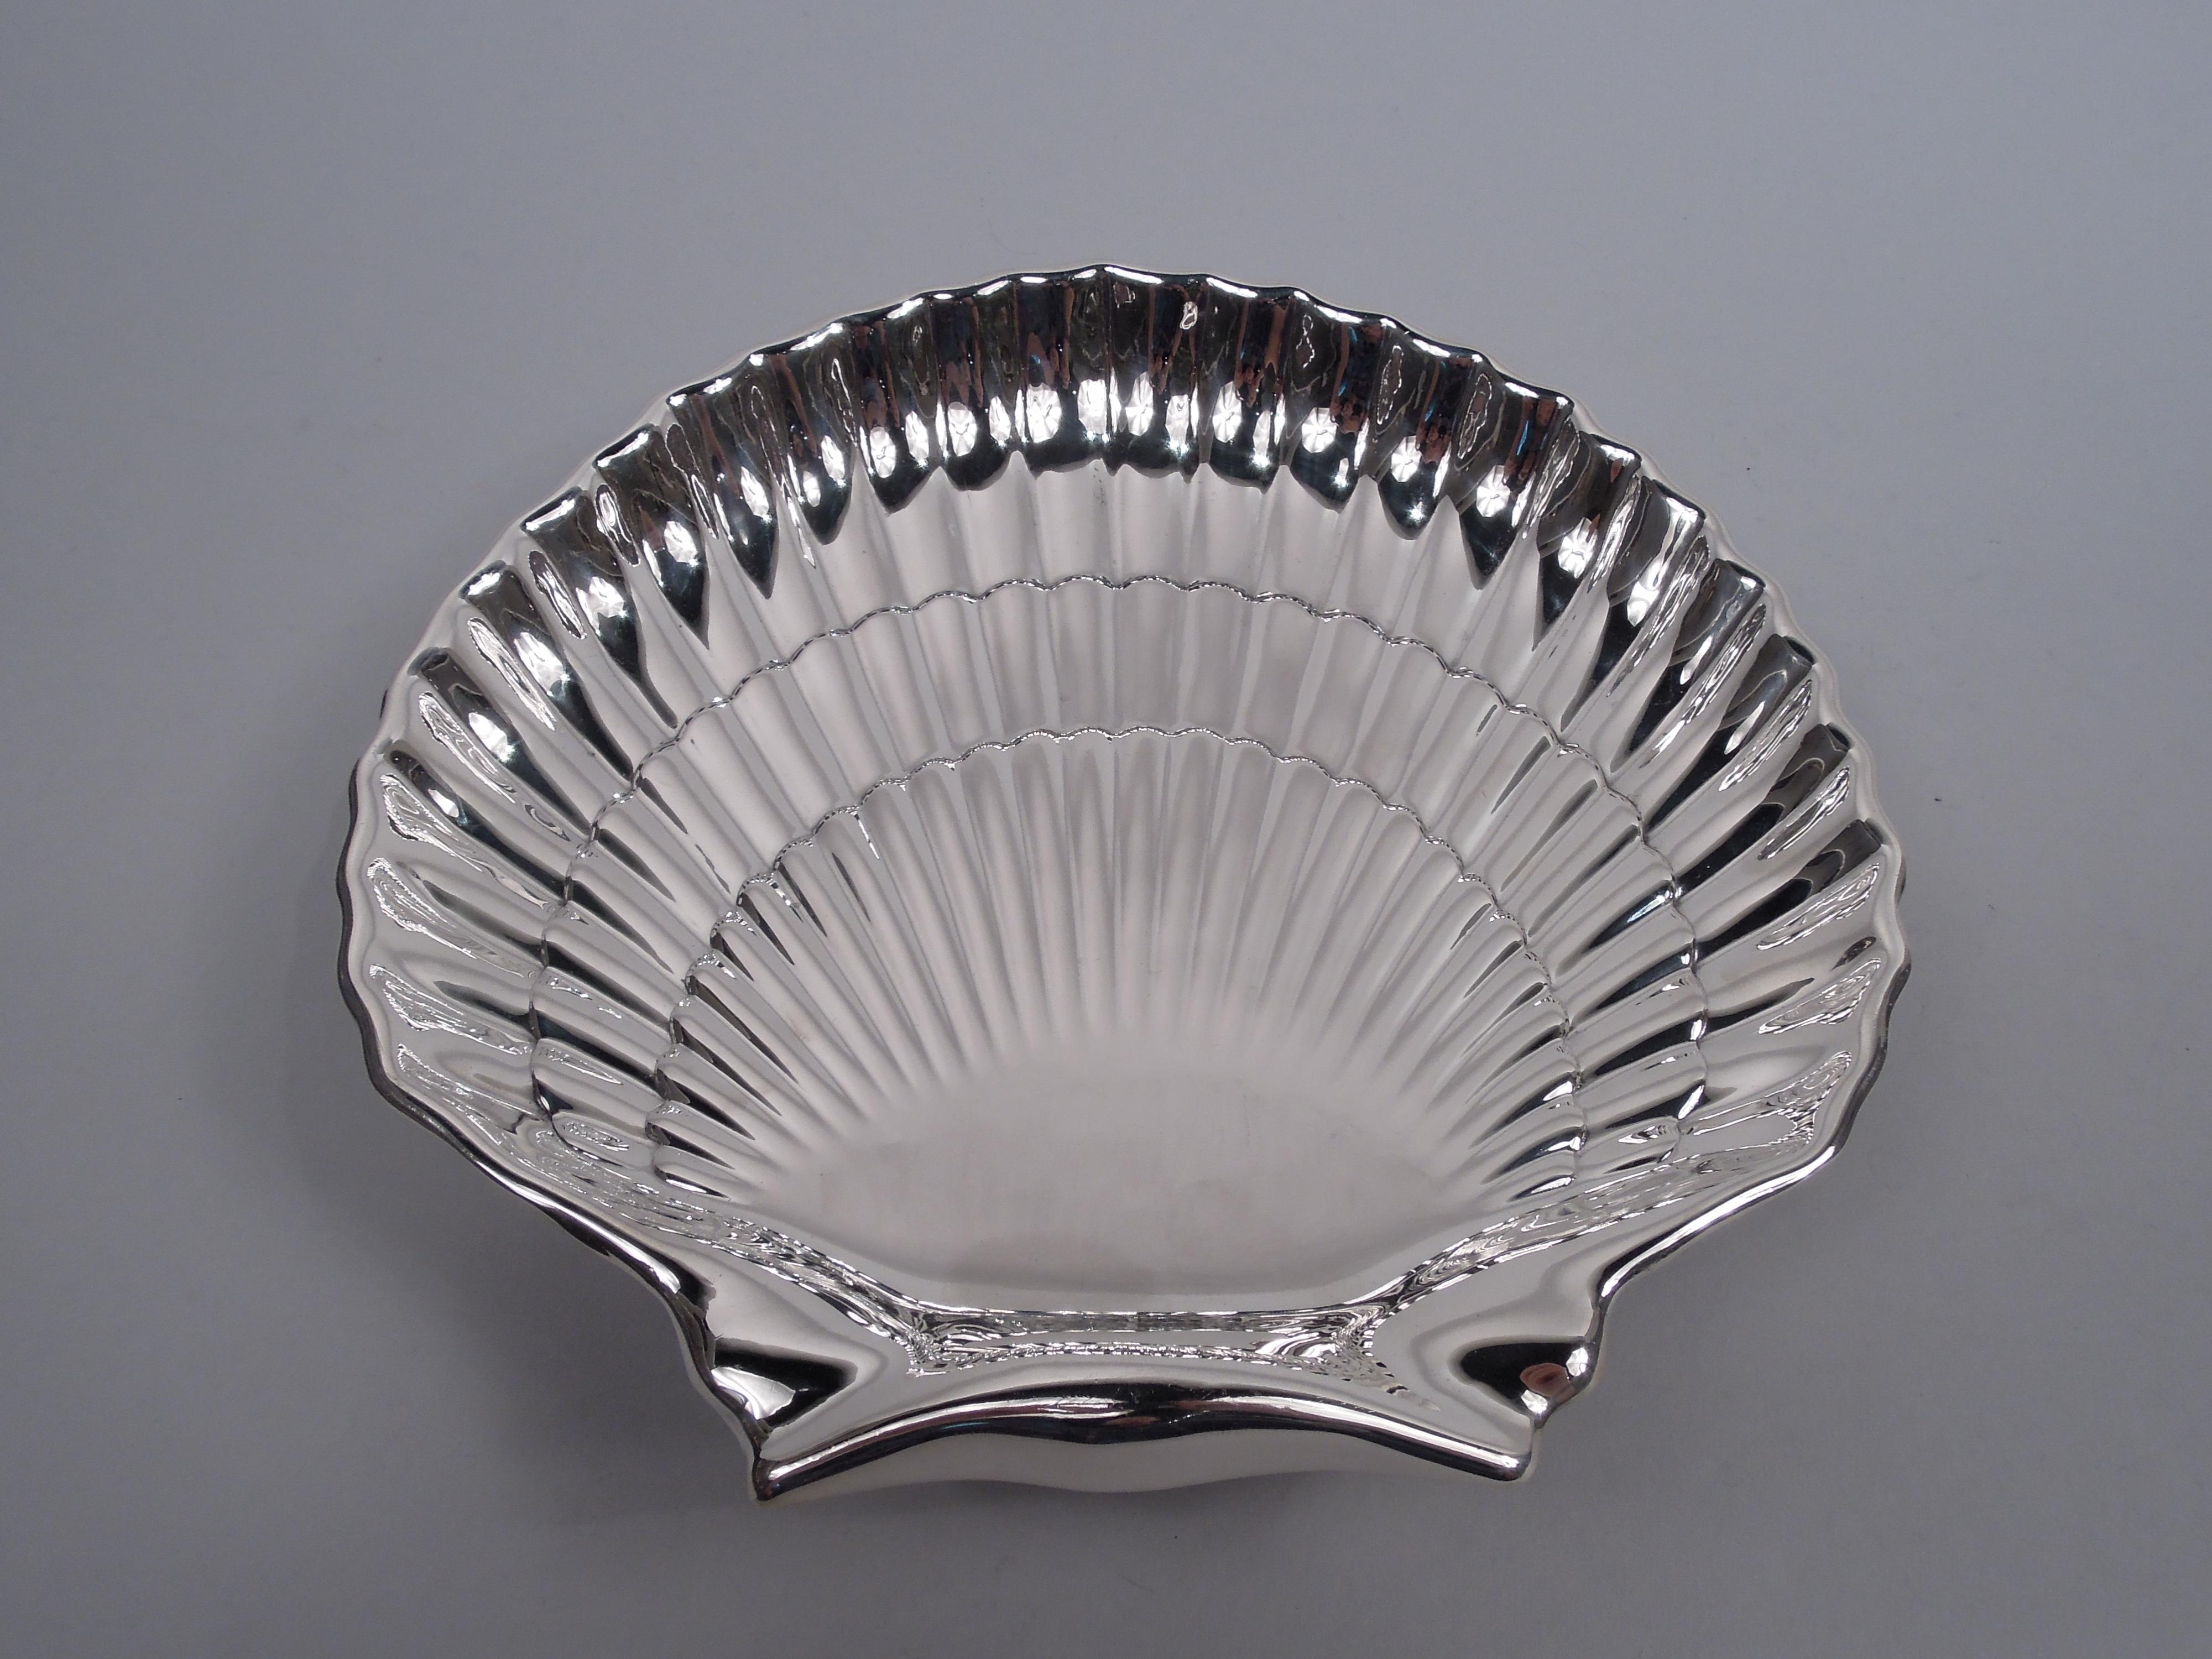 Large sterling silver scallop shell. Made by Gorham in Providence in 1947. Traditional form with dense and tiered flutes and 2 ball supports. Fully marked including maker’s stamp, date code, and no. 40617. Weight: 17 troy ounces.  